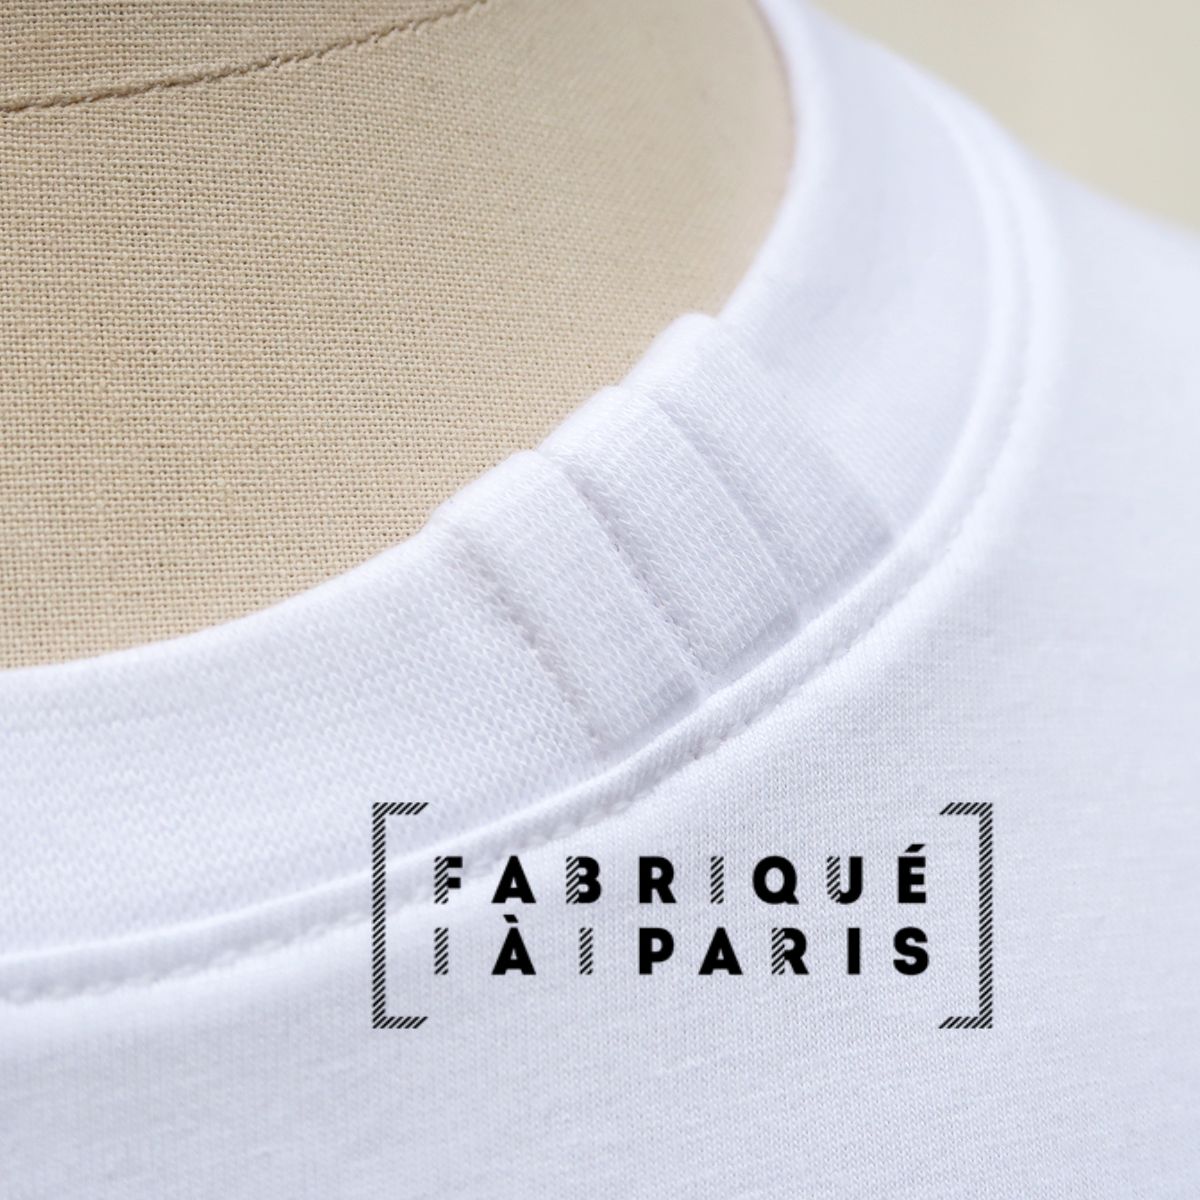 Gots certified French organic cotton T-shirt

Ethically manufactured in Paris Philippe Gaber since 2009.